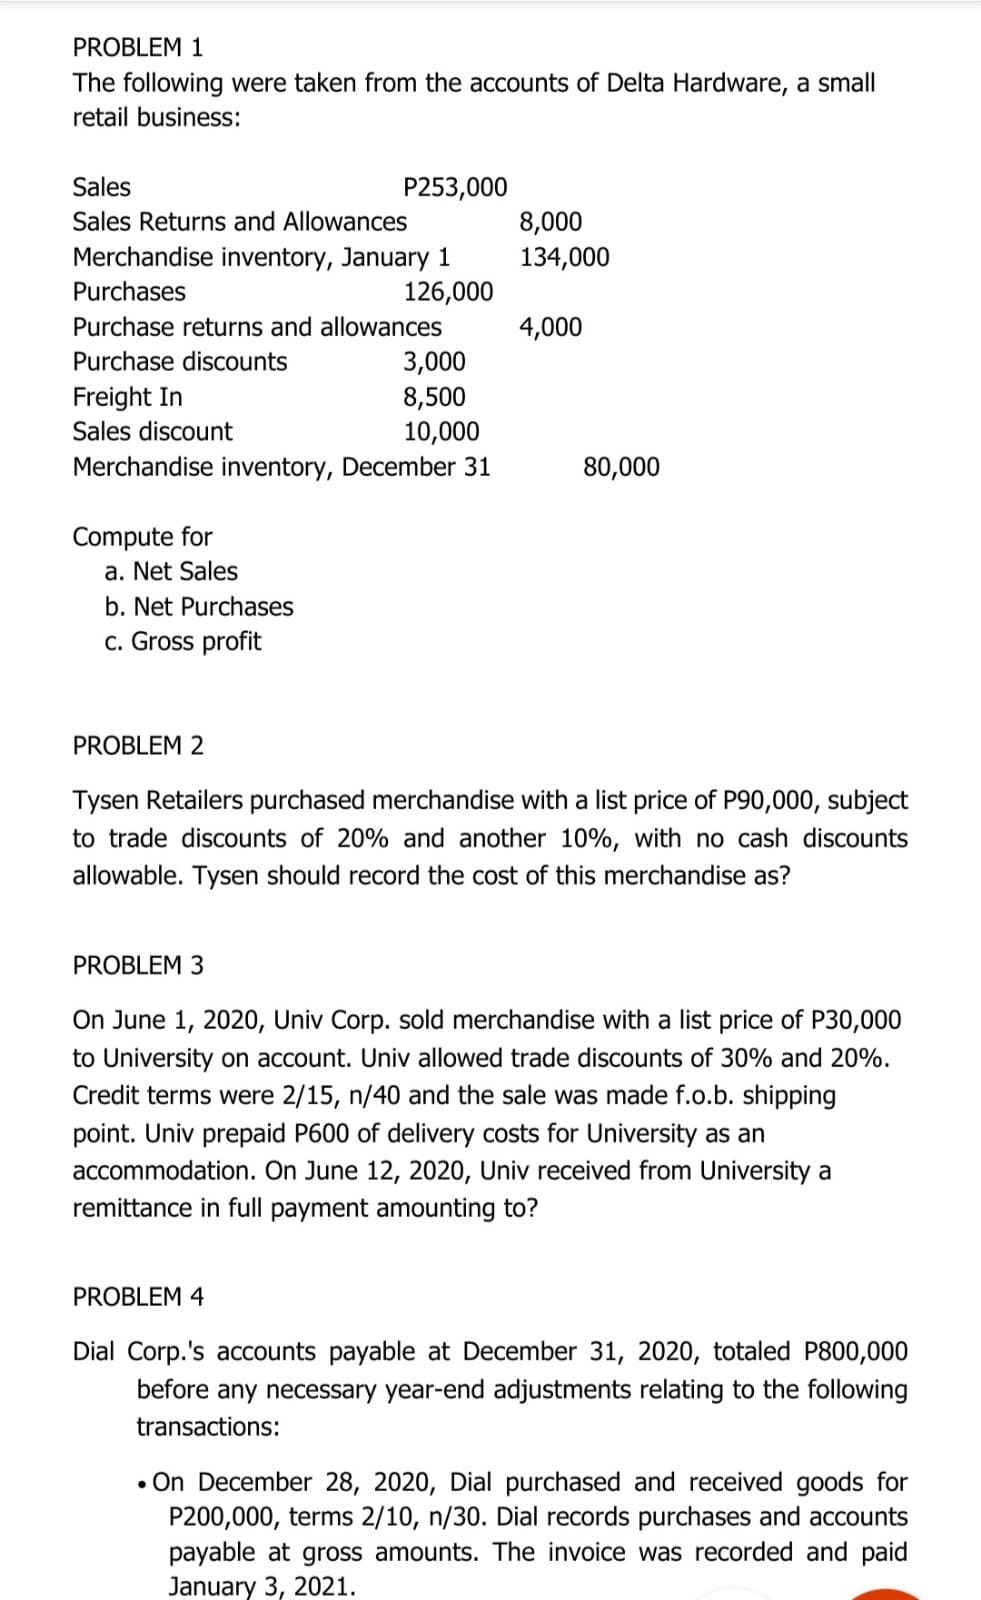 PROBLEM 1
The following were taken from the accounts of Delta Hardware, a small
retail business:
Sales
P253,000
8,000
134,000
Sales Returns and Allowances
Merchandise inventory, January 1
Purchases
126,000
Purchase returns and allowances
4,000
3,000
8,500
10,000
Merchandise inventory, December 31
Purchase discounts
Freight In
Sales discount
80,000
Compute for
a. Net Sales
b. Net Purchases
c. Gross profit
PROBLEM 2
Tysen Retailers purchased merchandise with a list price of P90,000, subject
to trade discounts of 20% and another 10%, with no cash discounts
allowable. Tysen should record the cost of this merchandise as?
PROBLEM 3
On June 1, 2020, Univ Corp. sold merchandise with a list price of P30,000
to University on account. Univ allowed trade discounts of 30% and 20%.
Credit terms were 2/15, n/40 and the sale was made f.o.b. shipping
point. Univ prepaid P600 of delivery costs for University as an
accommodation. On June 12, 2020, Univ received from University a
remittance in full payment amounting to?
PROBLEM 4
Dial Corp.'s accounts payable at December 31, 2020, totaled P800,000
before any necessary year-end adjustments relating to the following
transactions:
• On December 28, 2020, Dial purchased and received goods for
P200,000, terms 2/10, n/30. Dial records purchases and accounts
payable at gross amounts. The invoice was recorded and paid
January 3, 2021.
